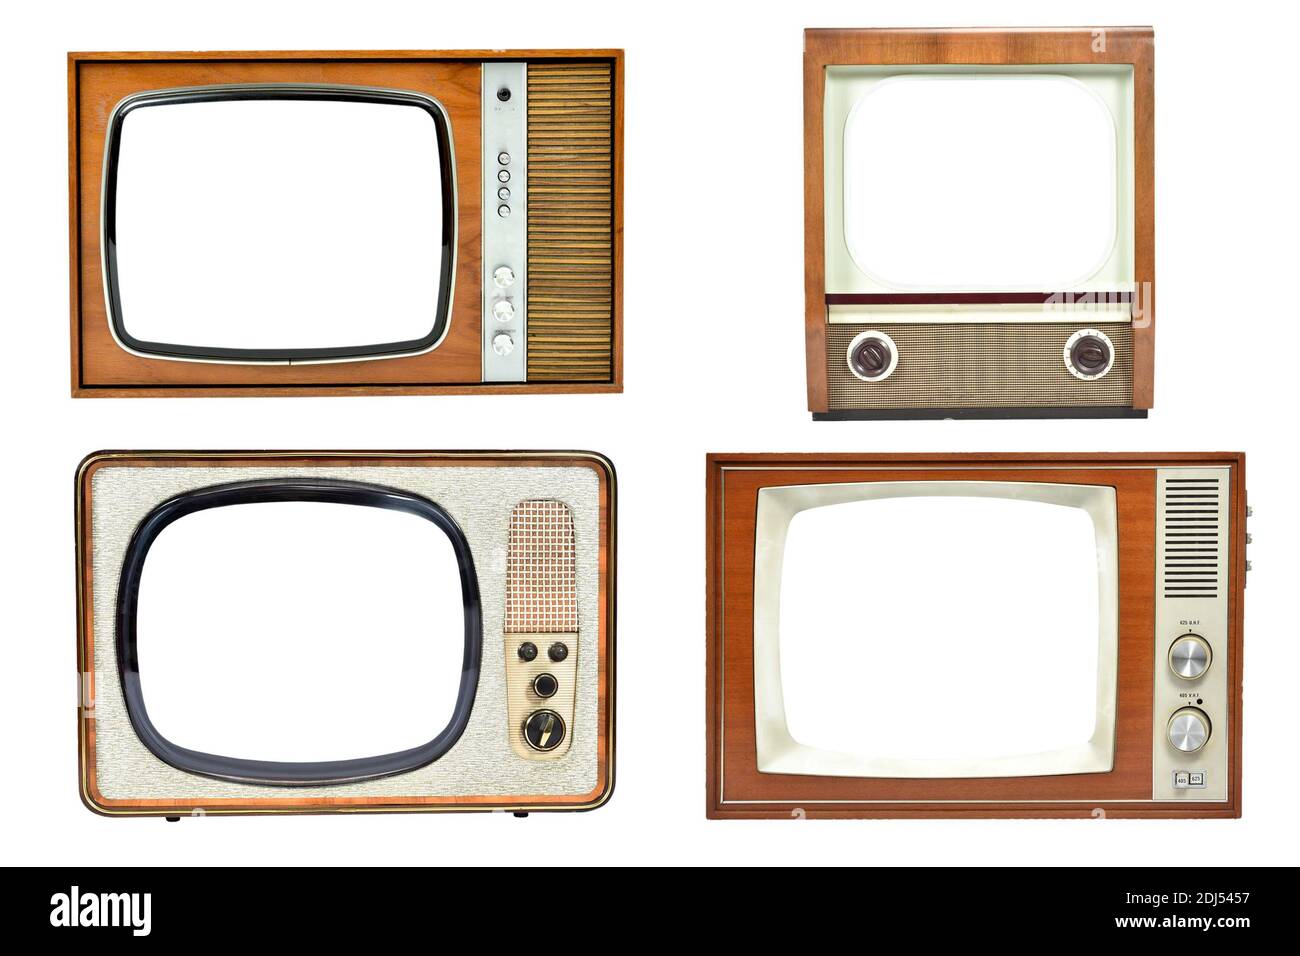 Vintage TV set collection with blank screen isolated on white background Stock Photo